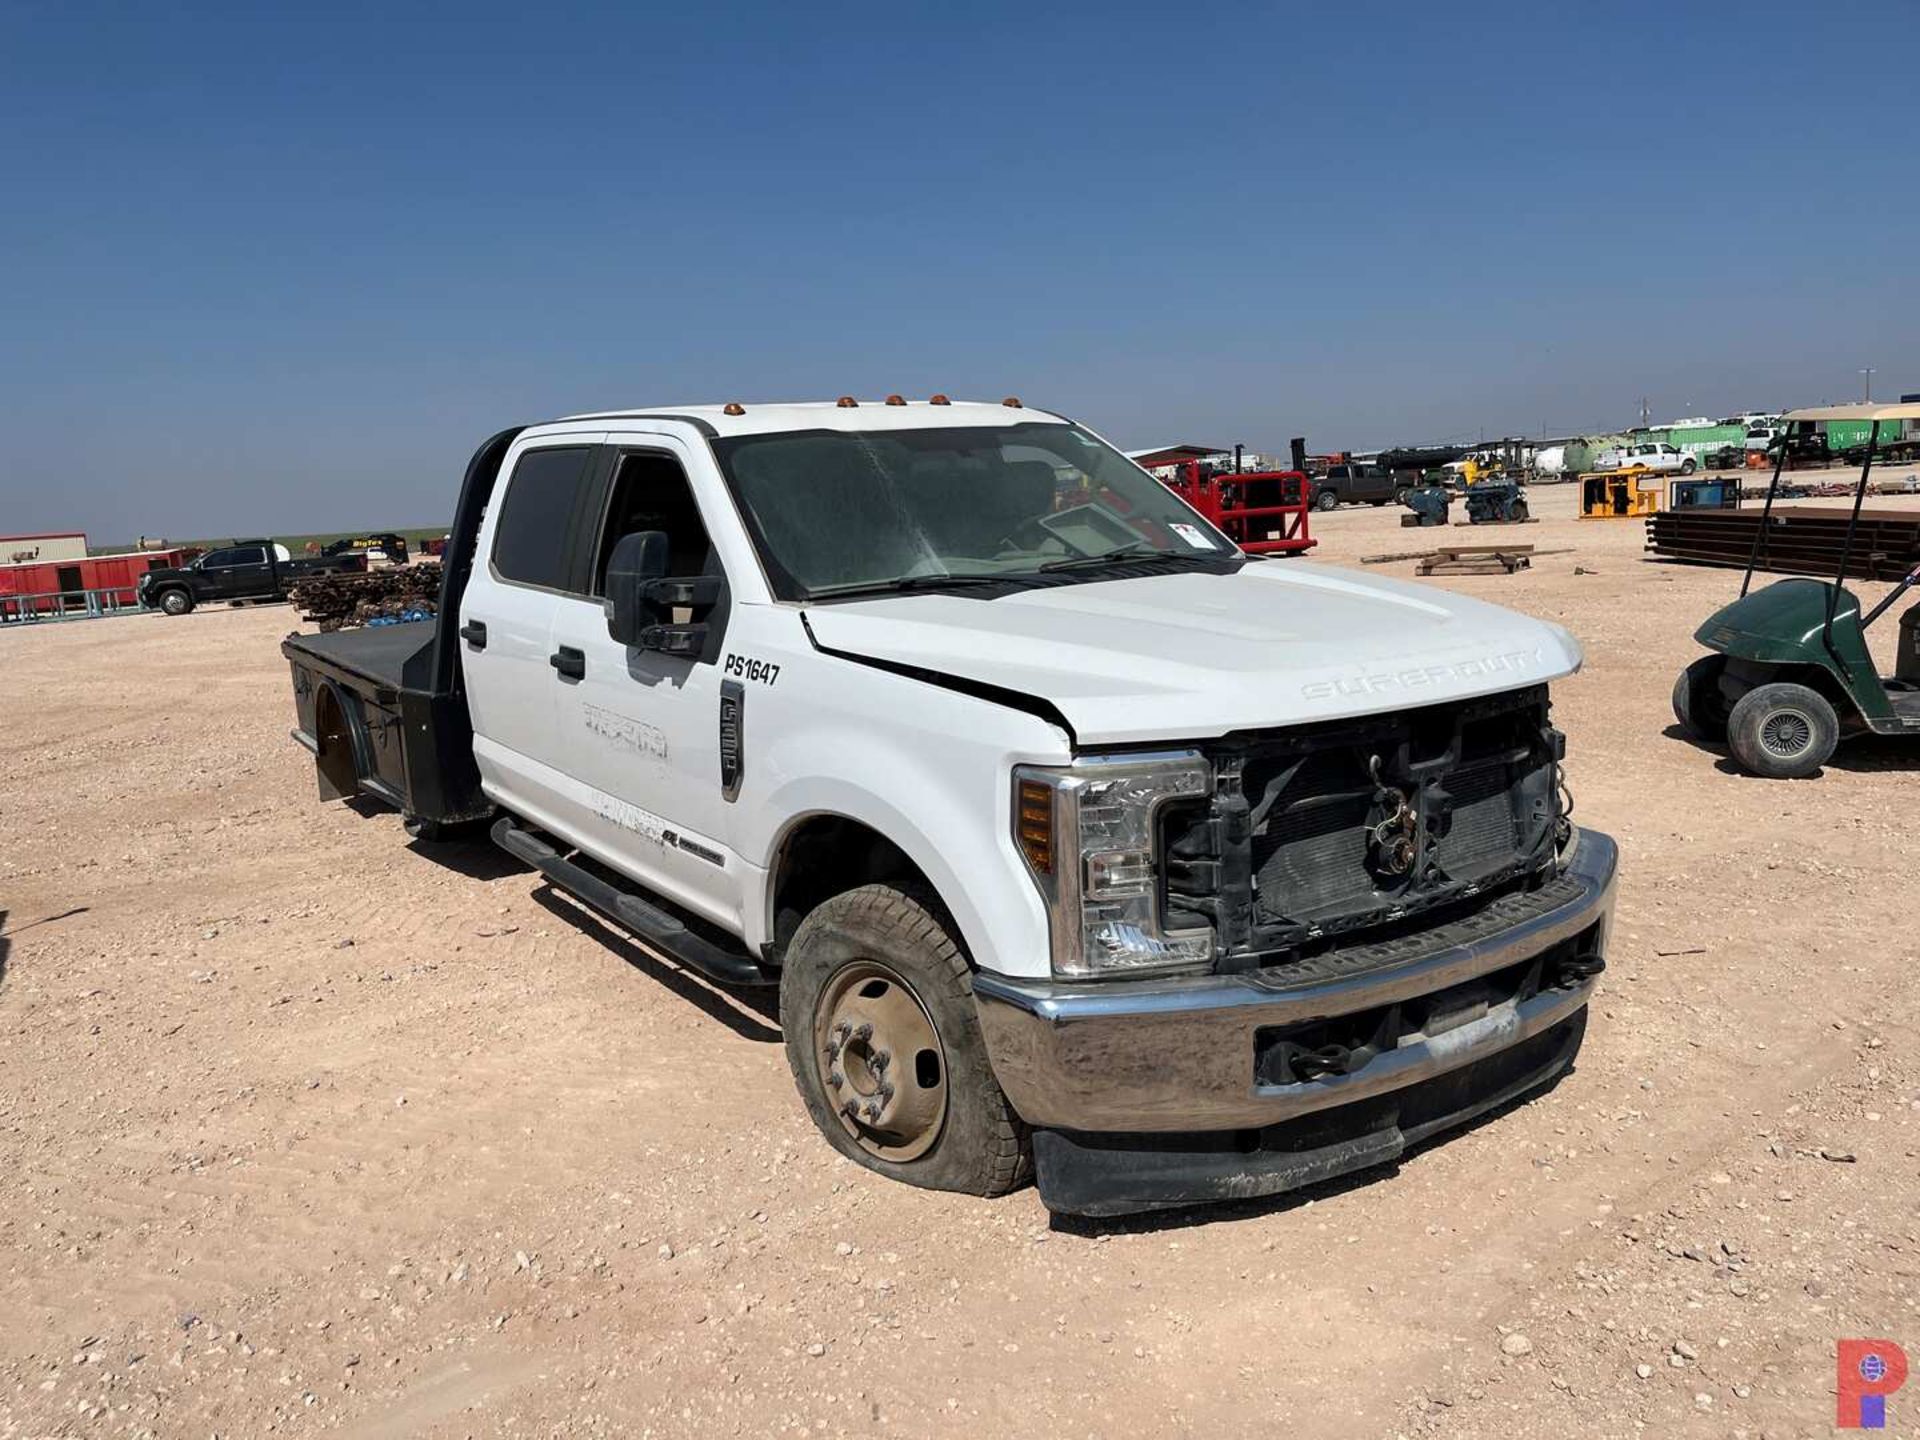 2018 FORD F-350 CREW CAB FLATBED TRUCK - Image 2 of 7